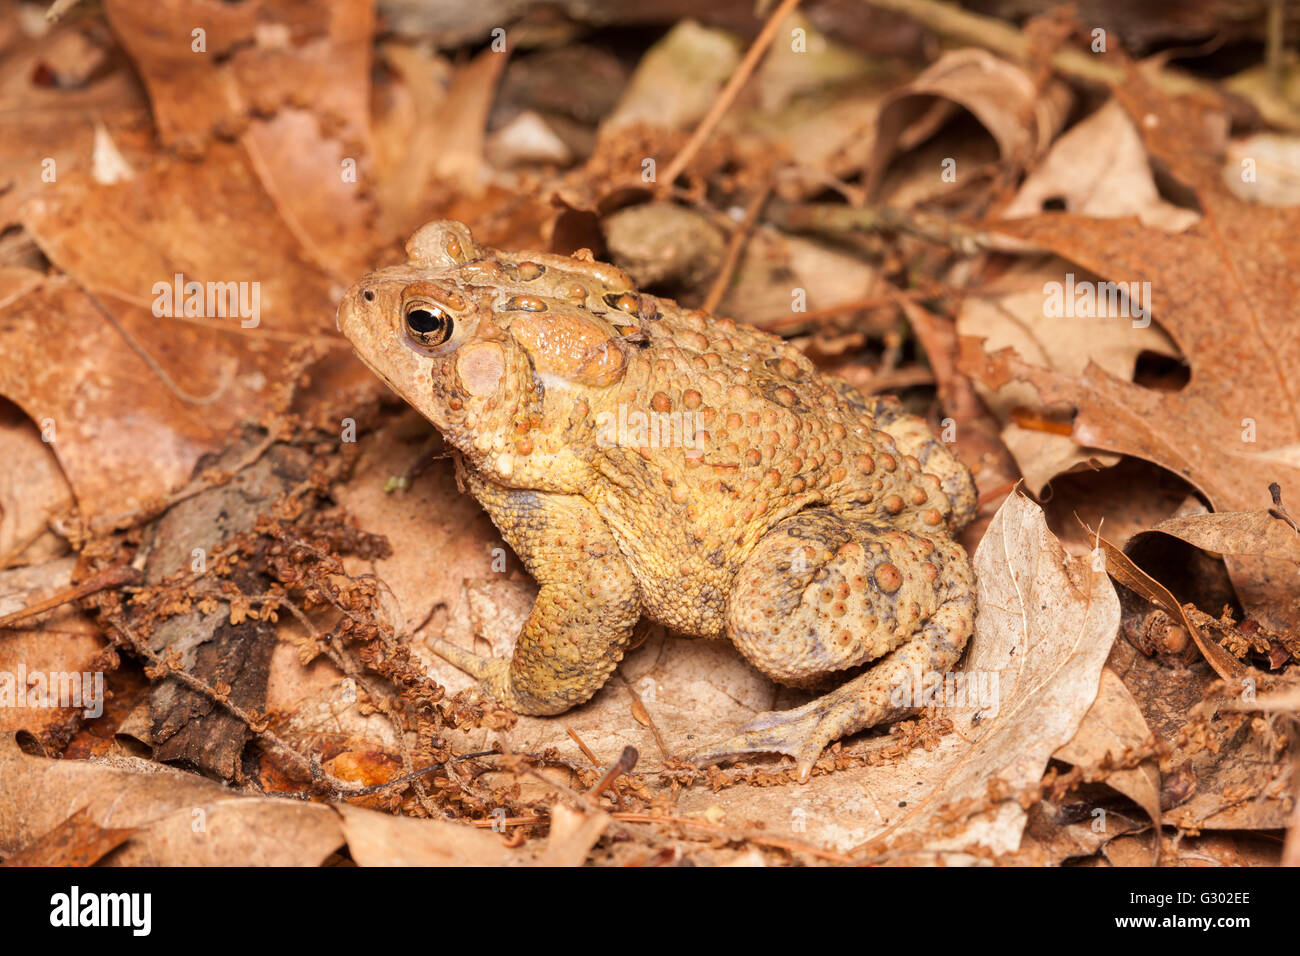 An American Toad, subspecies Eastern American Toad (Anaxyrus americanus americanus), sits among dead leaves on the ground in a woodlands habitat. Stock Photo